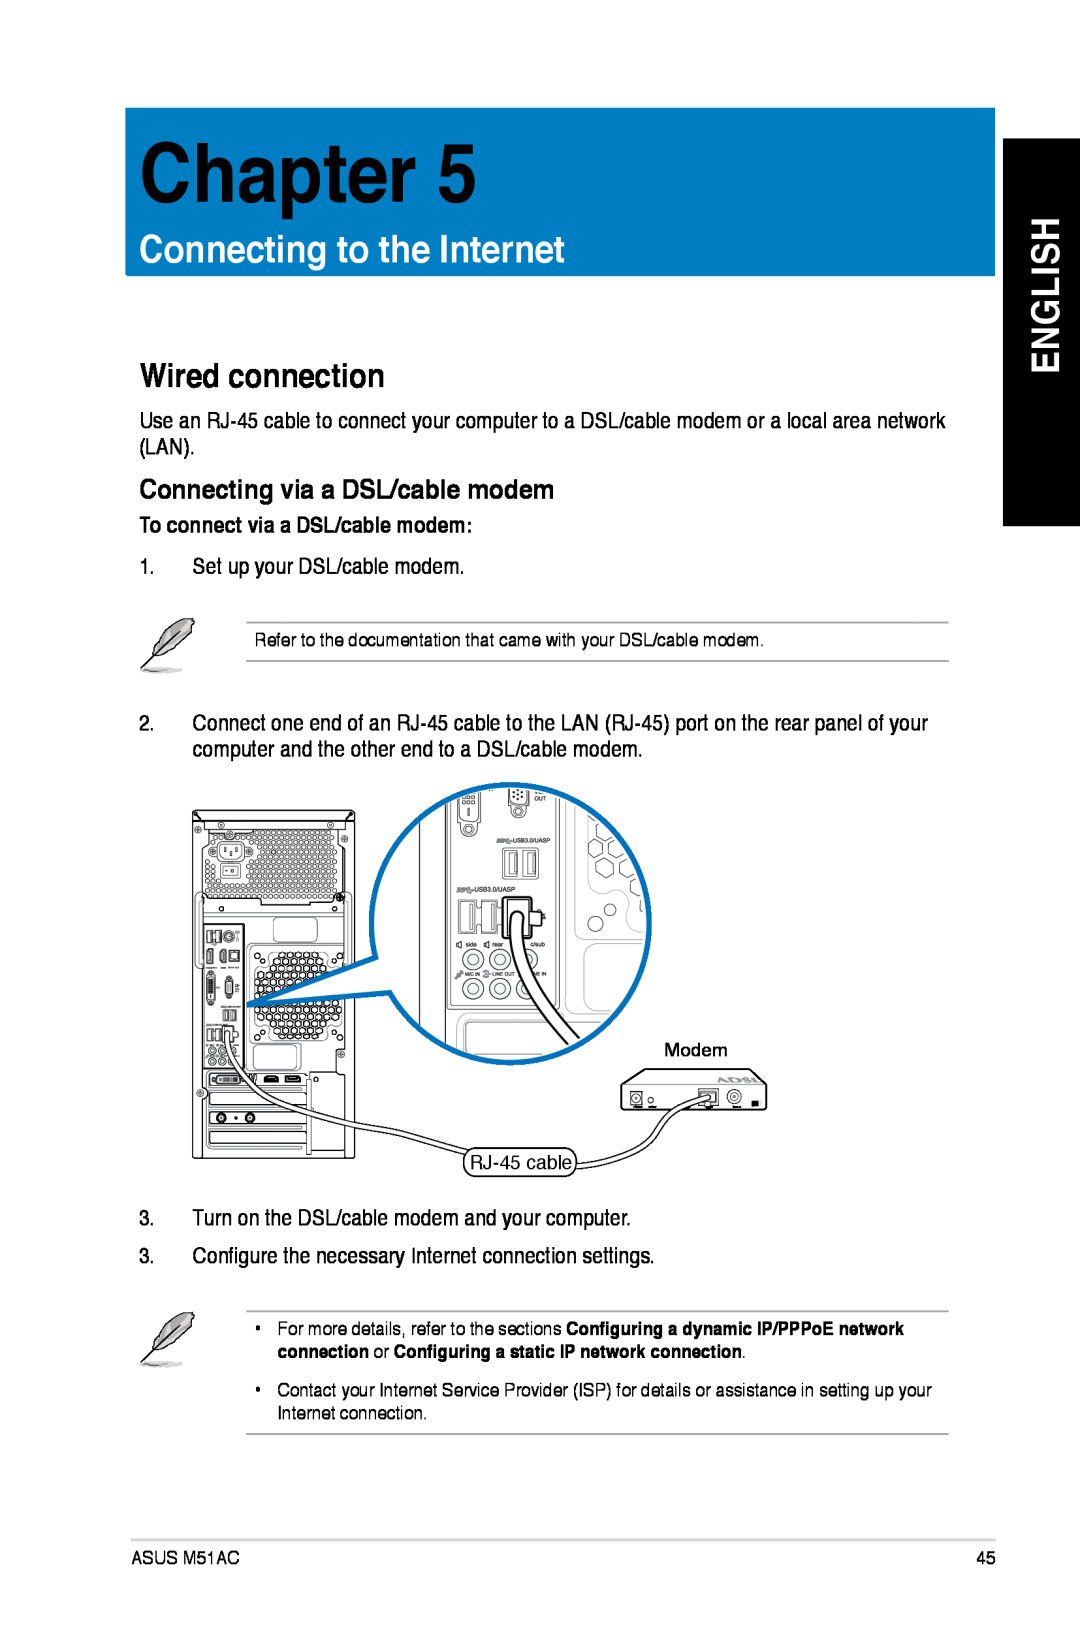 Asus M51ACUS006S Connecting to the Internet, Wired connection, Chapter, English, To connect via a DSL/cable modem 